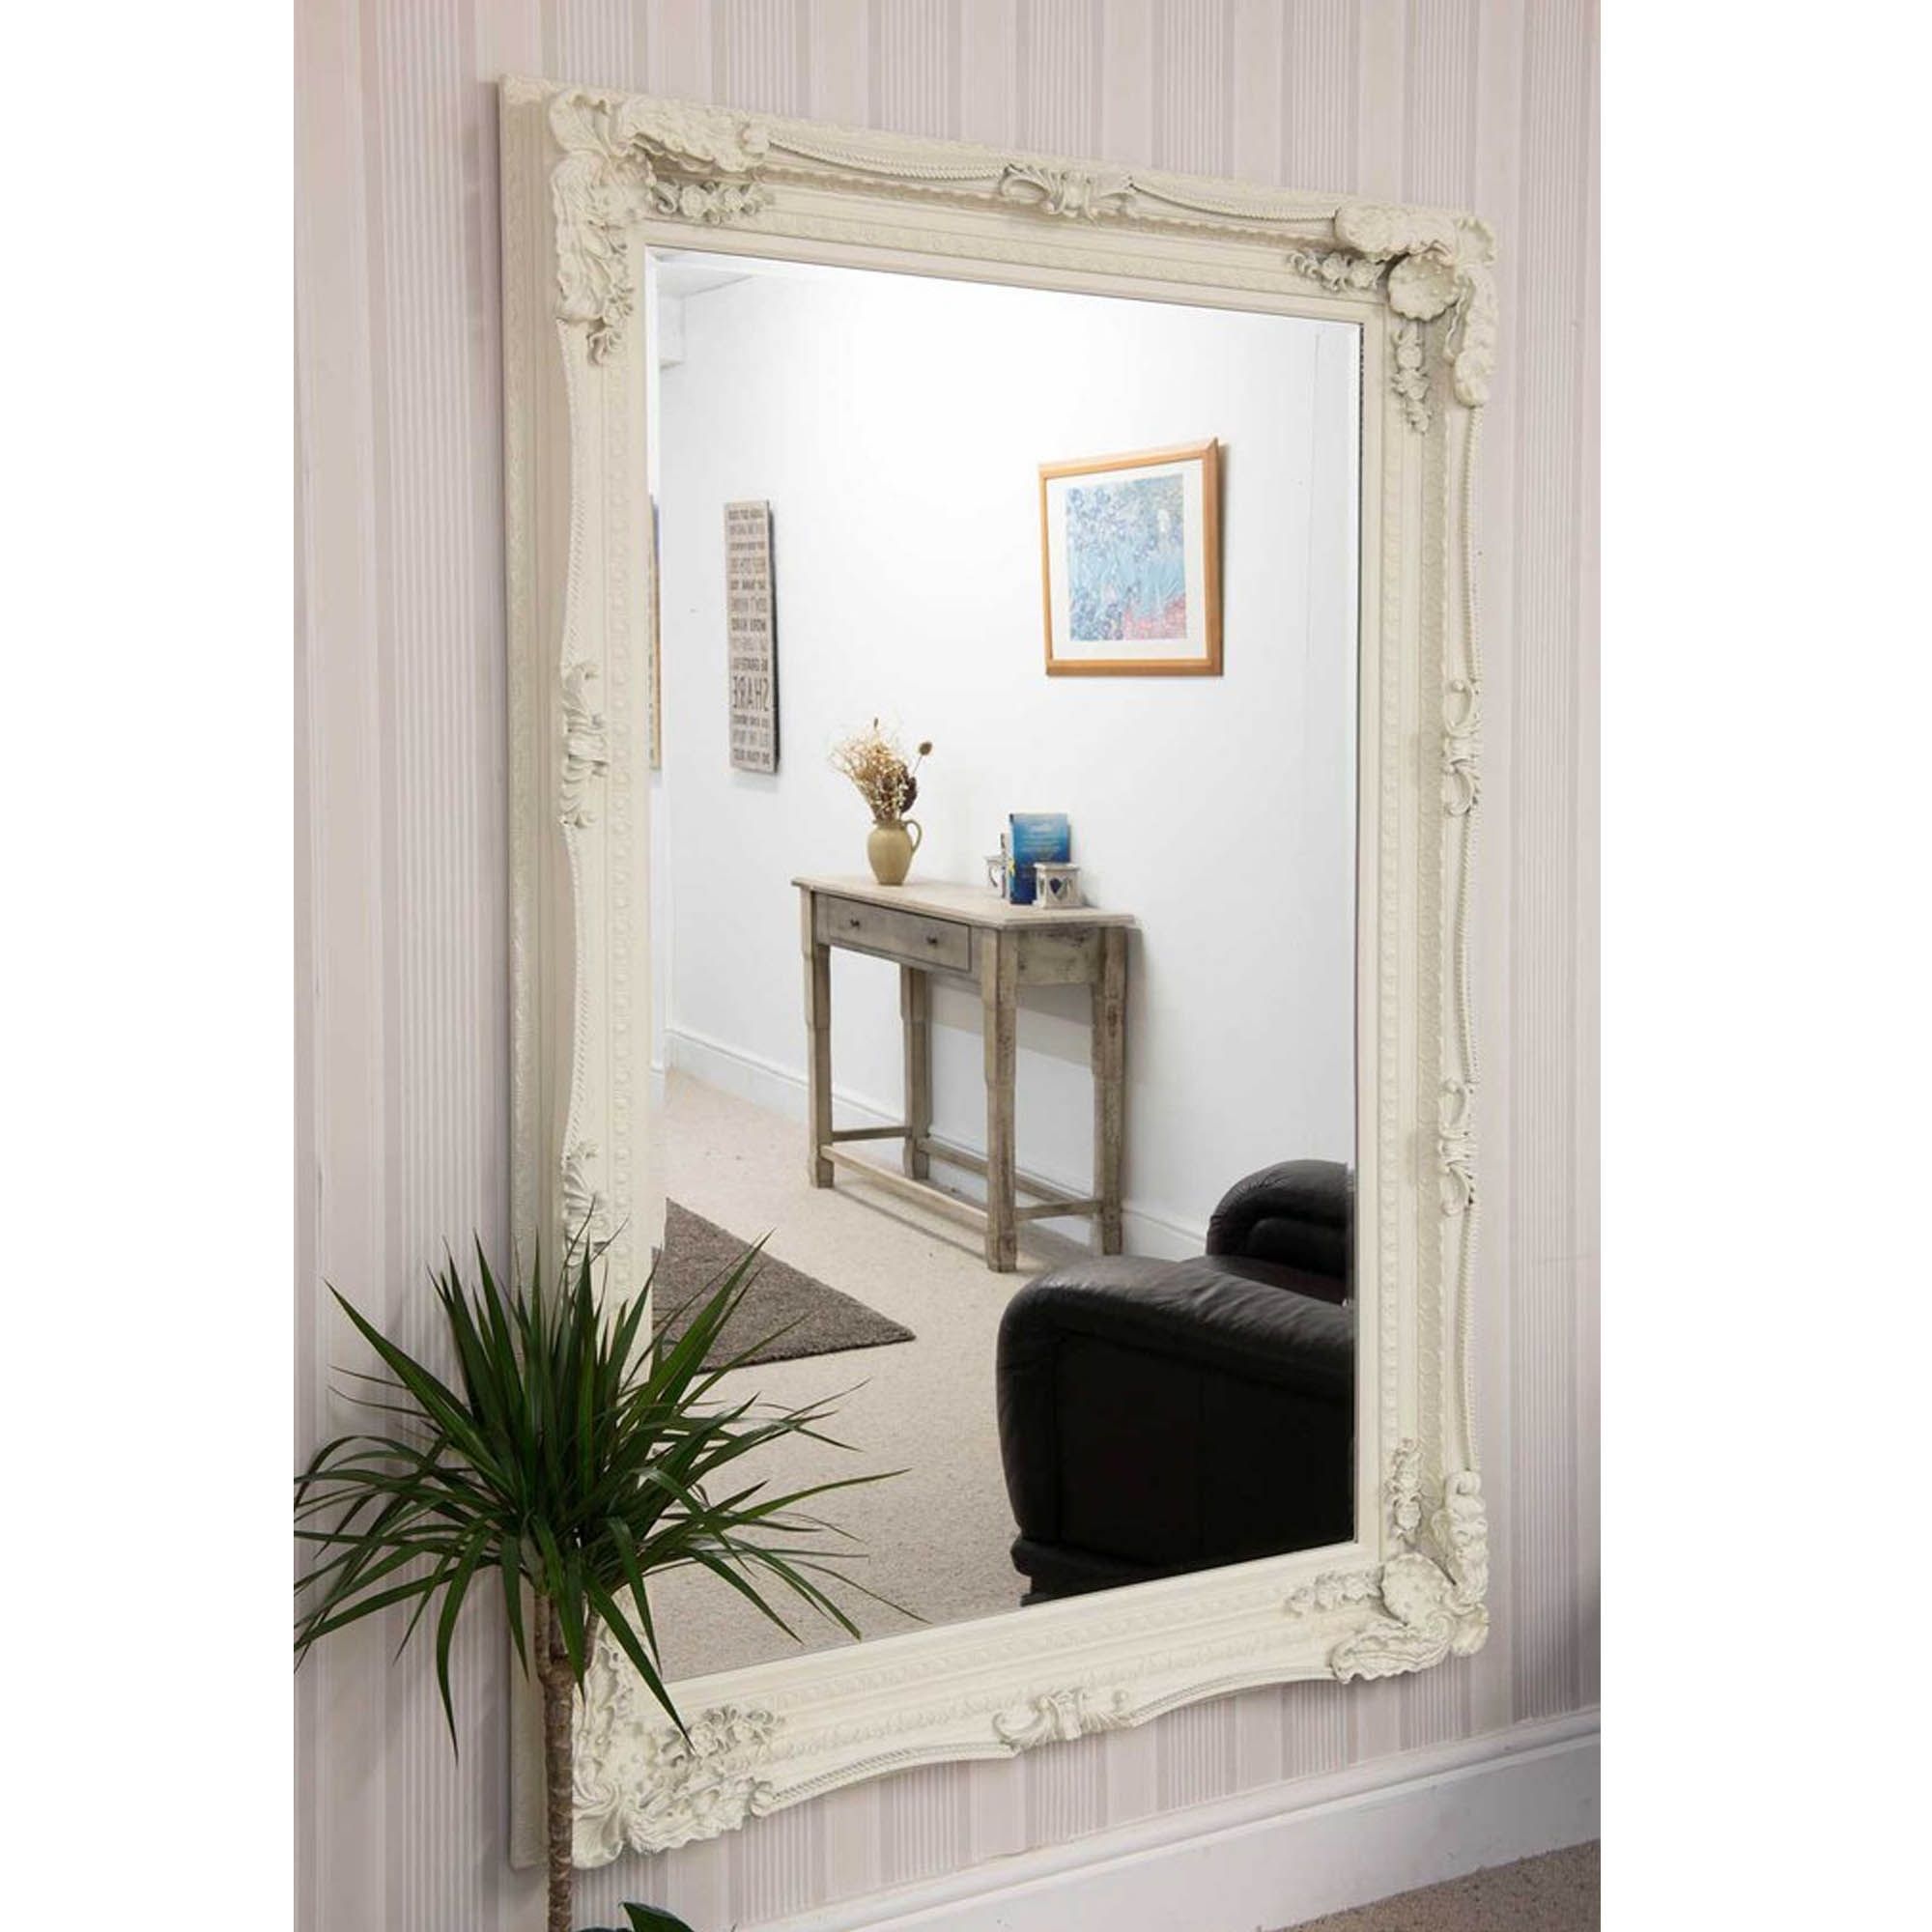 Carved Louis Antique French Style White Wall Mirror | Hd365 With White Wall Mirrors (View 11 of 15)